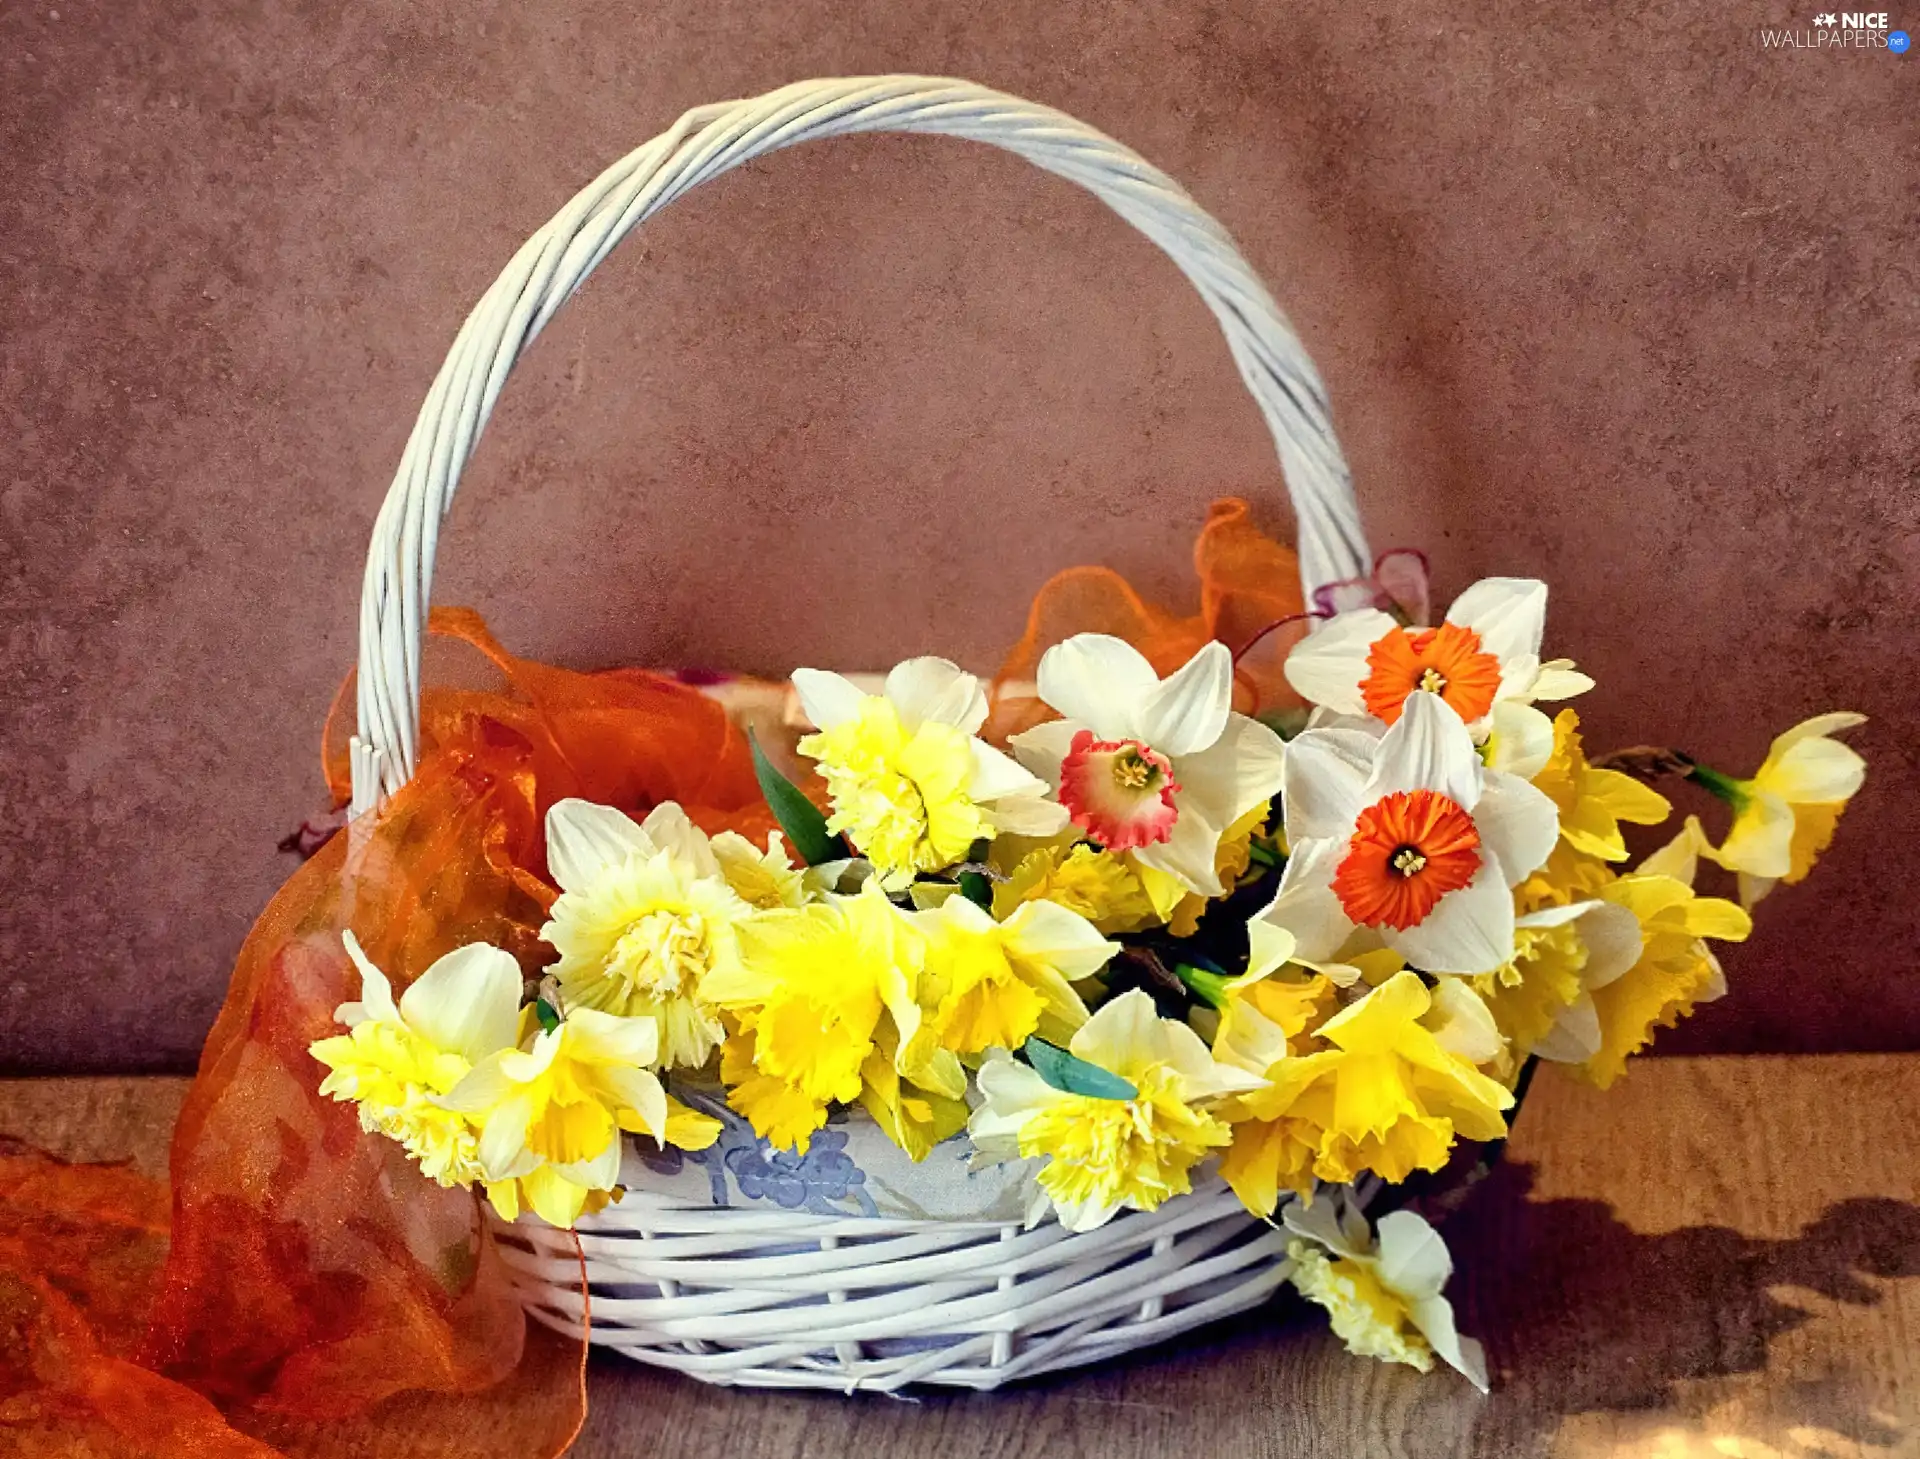 Daffodils, Flowers, basket, narcissus, Spring, wicker, apatite